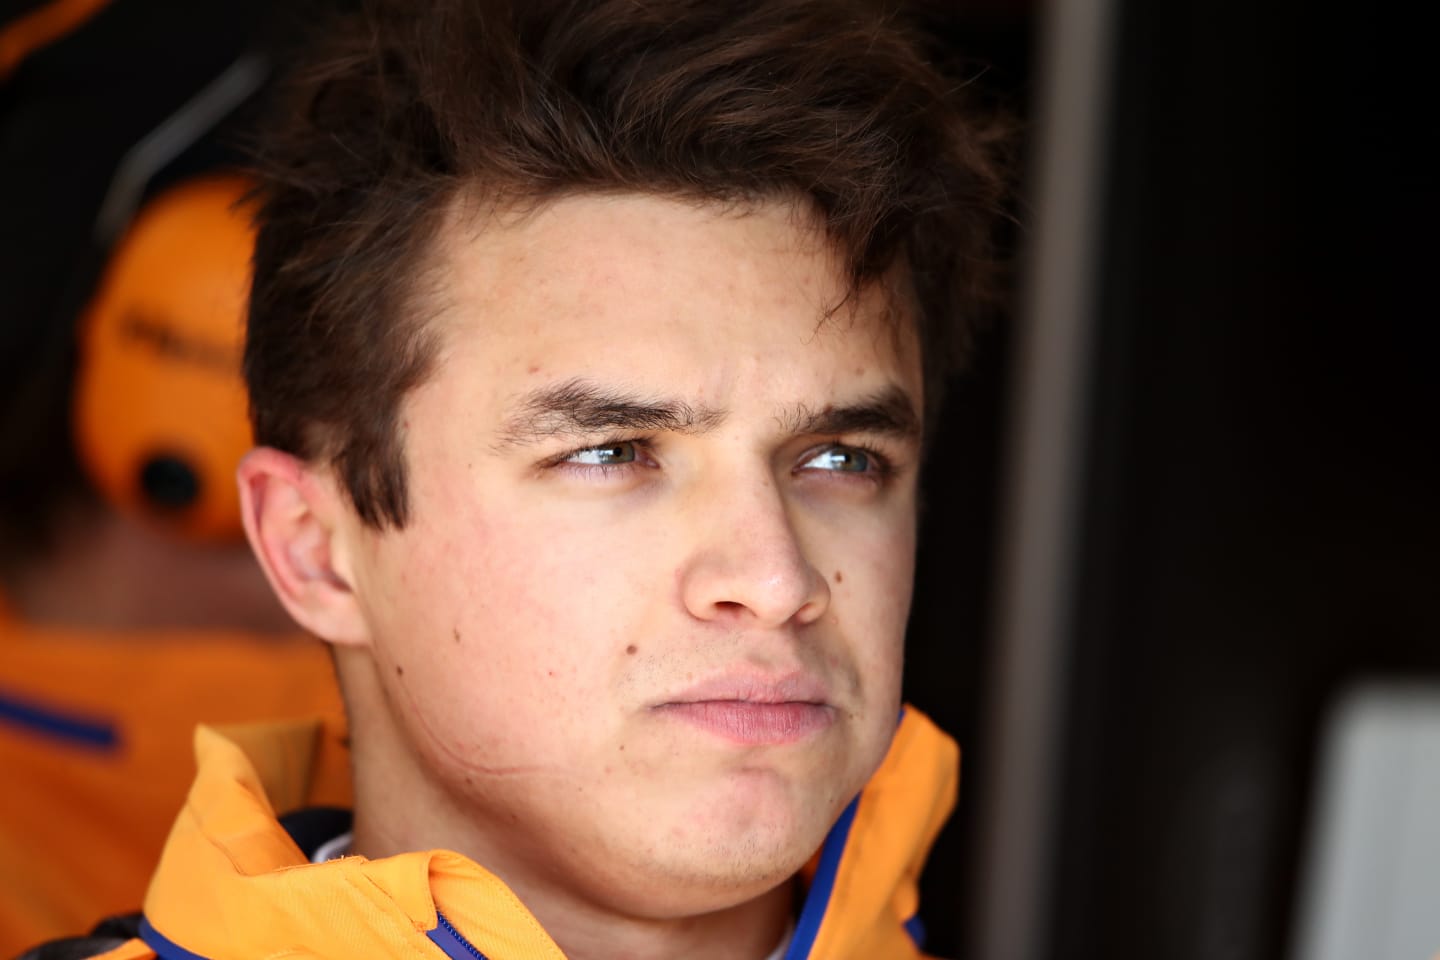 BARCELONA, SPAIN - FEBRUARY 20: Lando Norris of Great Britain and McLaren F1 looks on in the garage